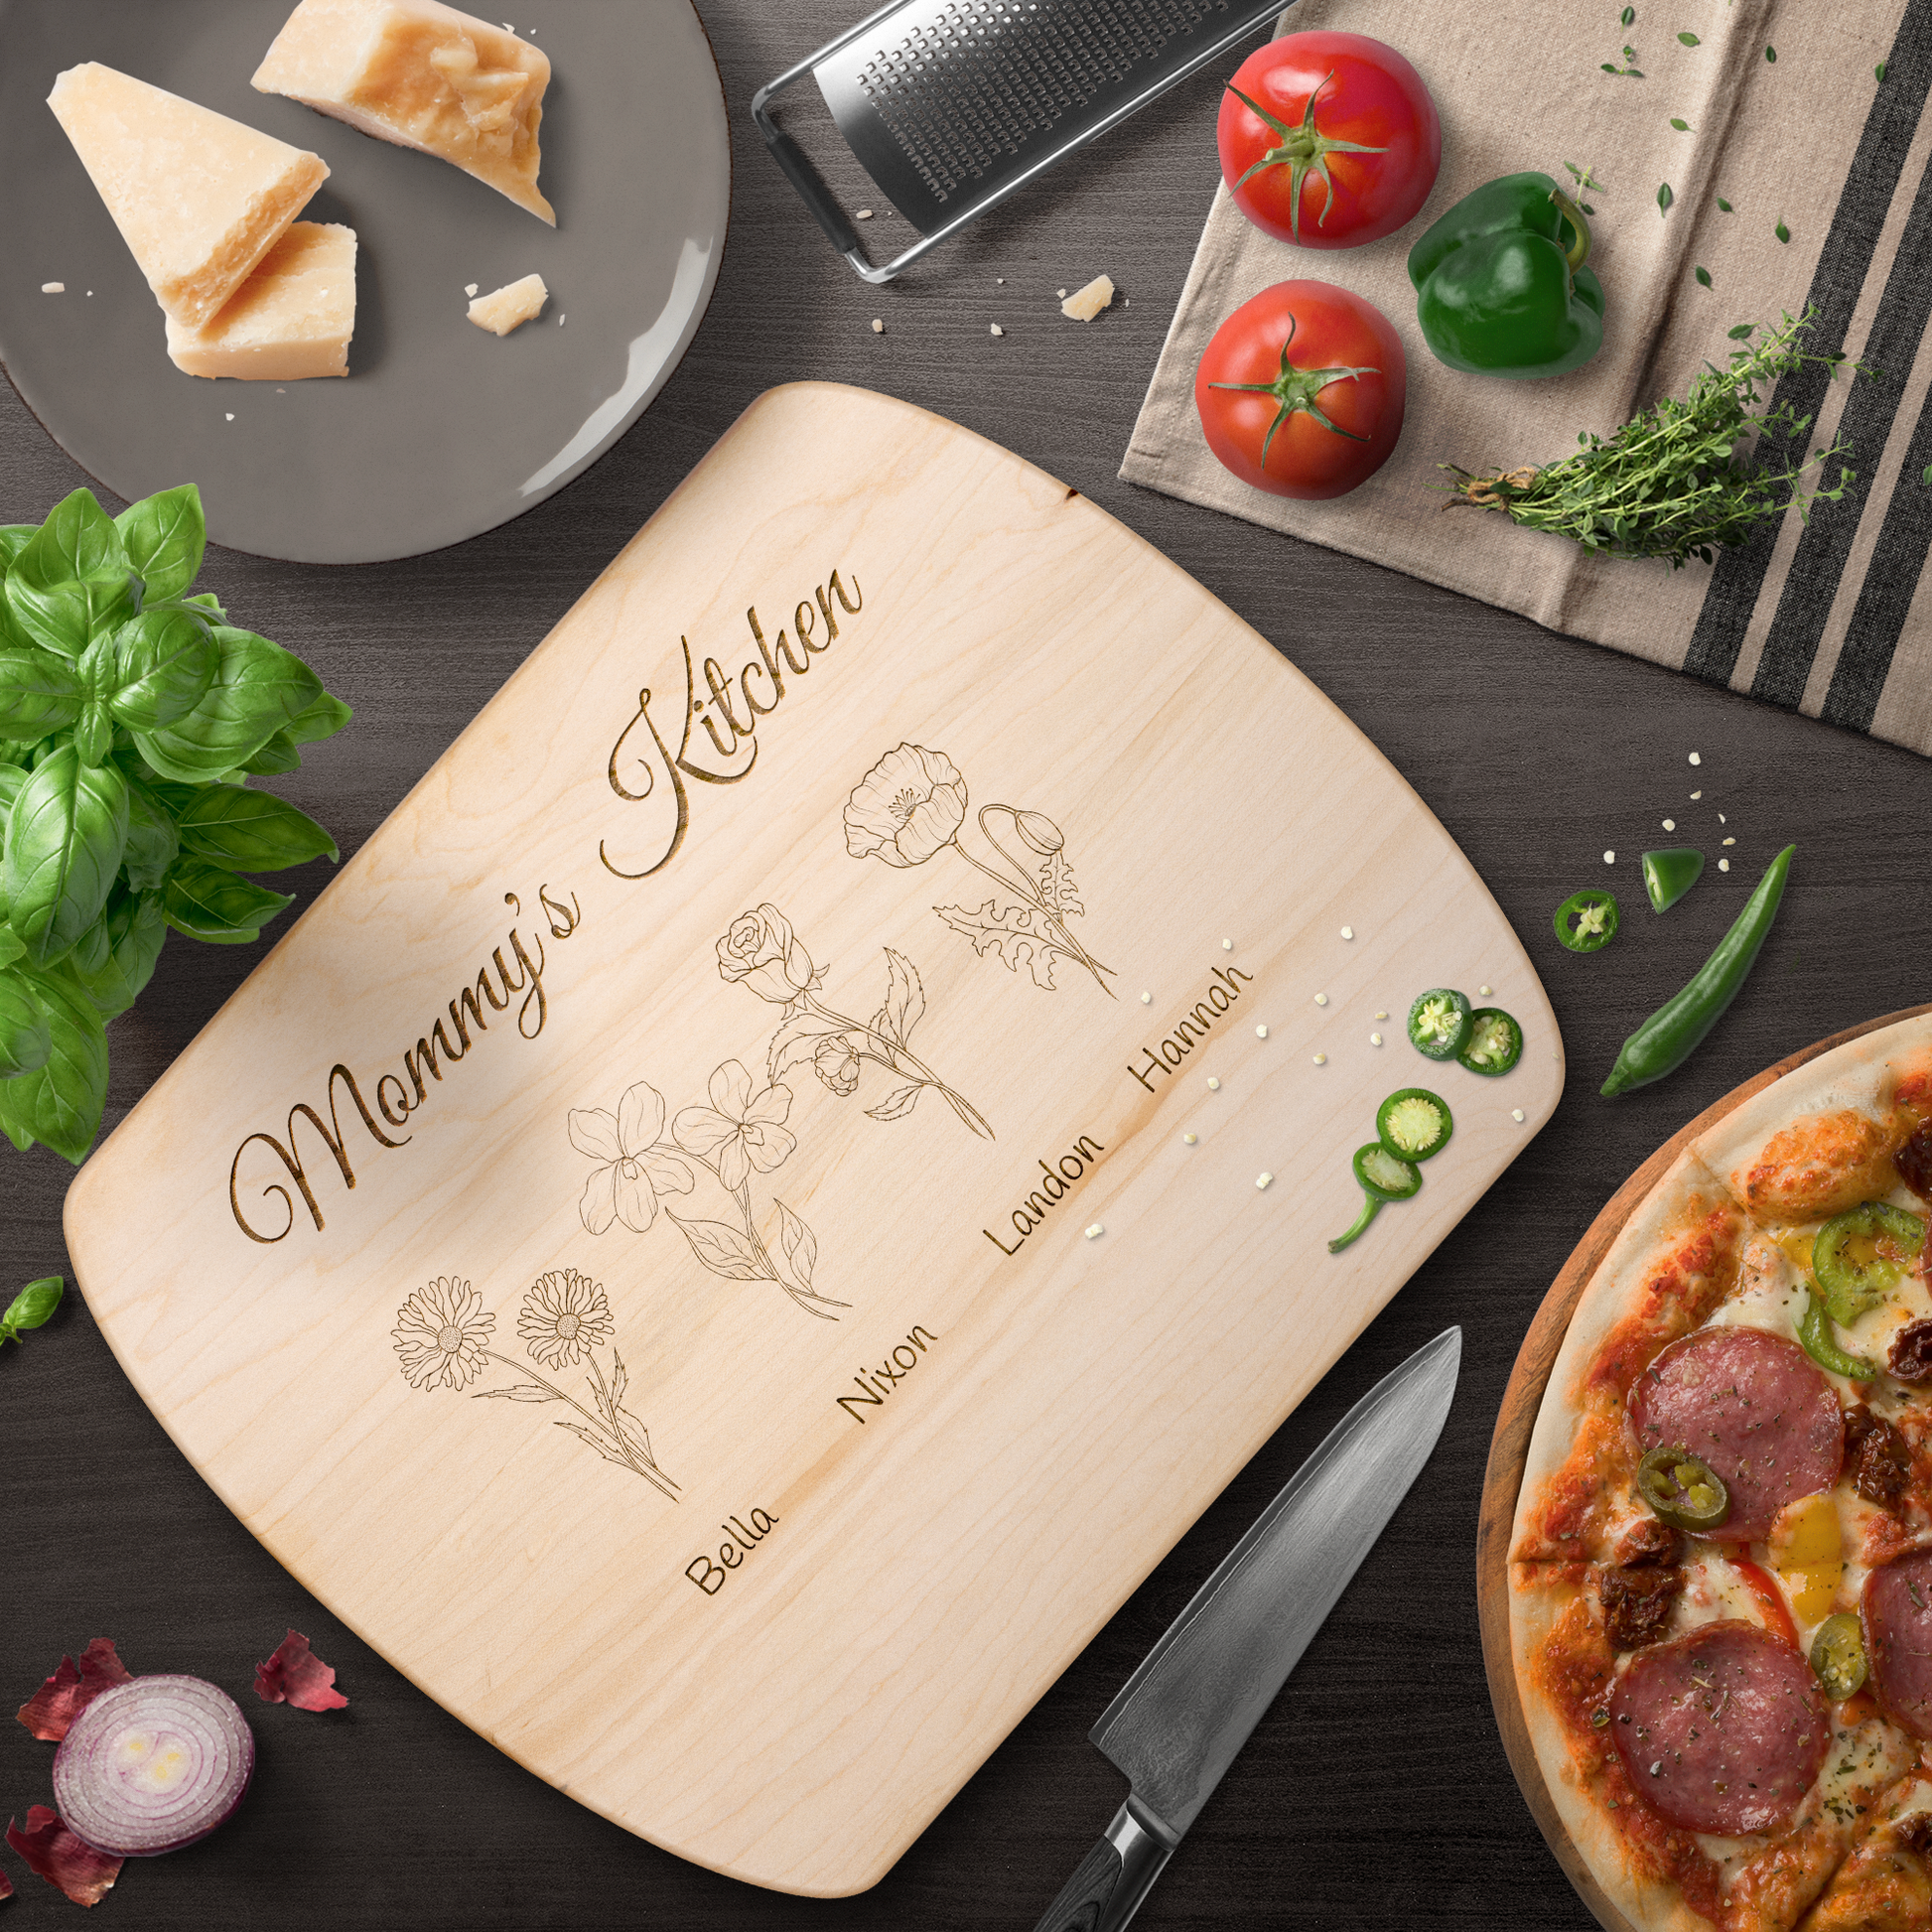 Get trendy with Mama's Kitchen Hardwood Oval Cutting Board -  available at Good Gift Company. Grab yours for $18.50 today!